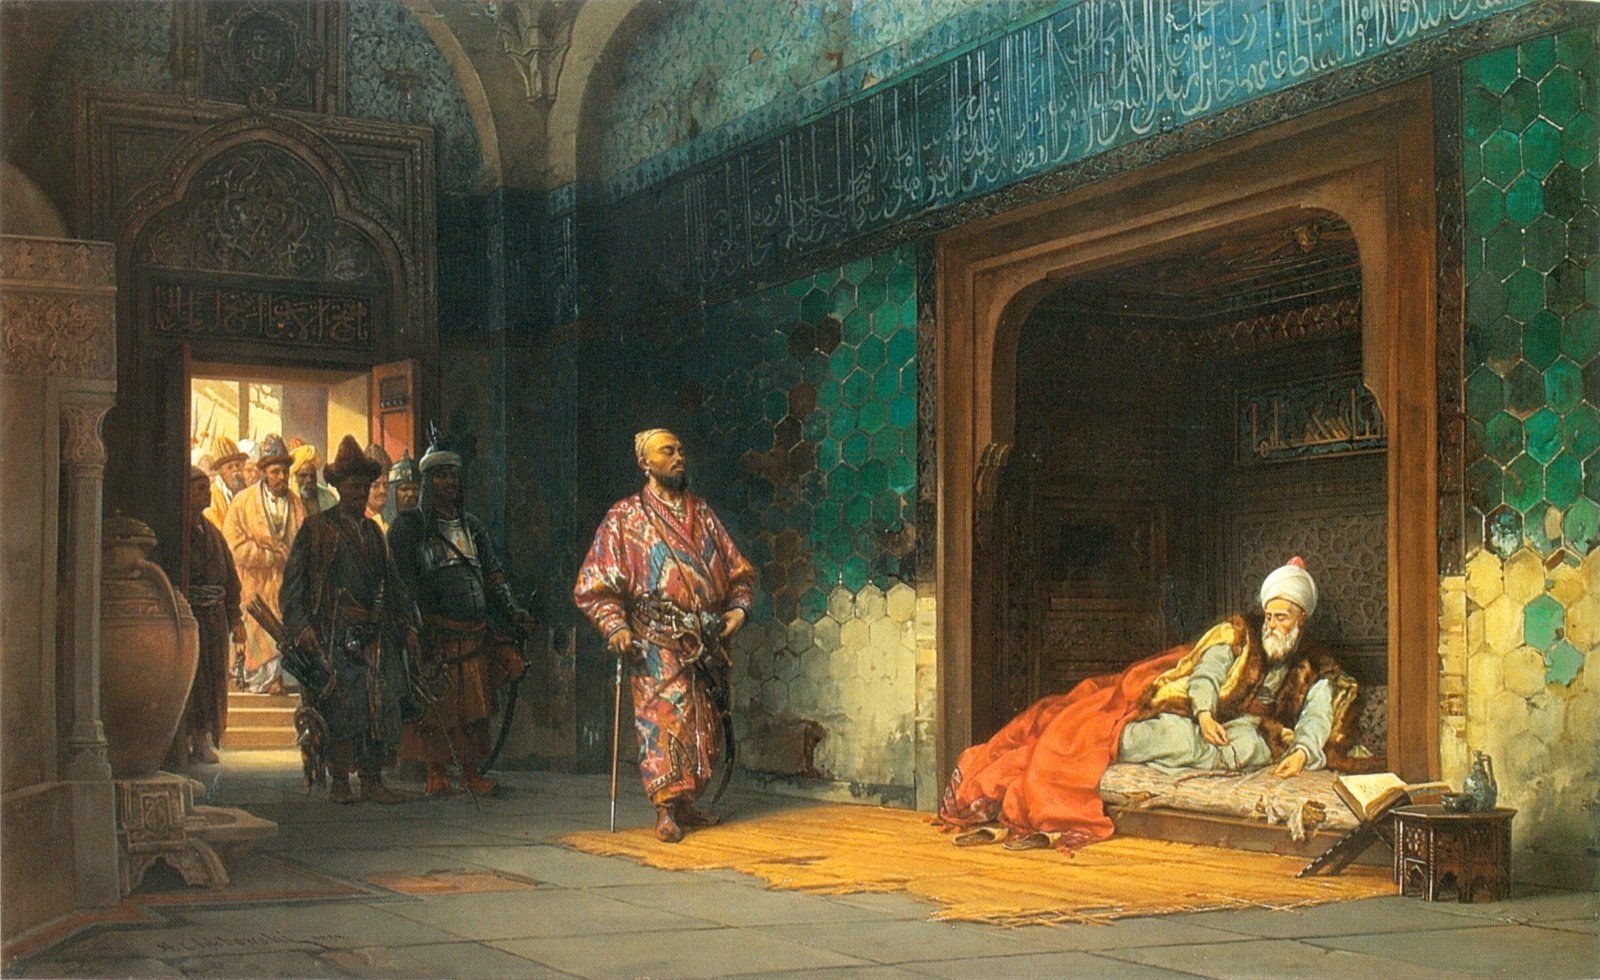 painting, History, Royal, Prisons, Classic art, Islamic architecture, Warrior, Traditional clothing Wallpaper